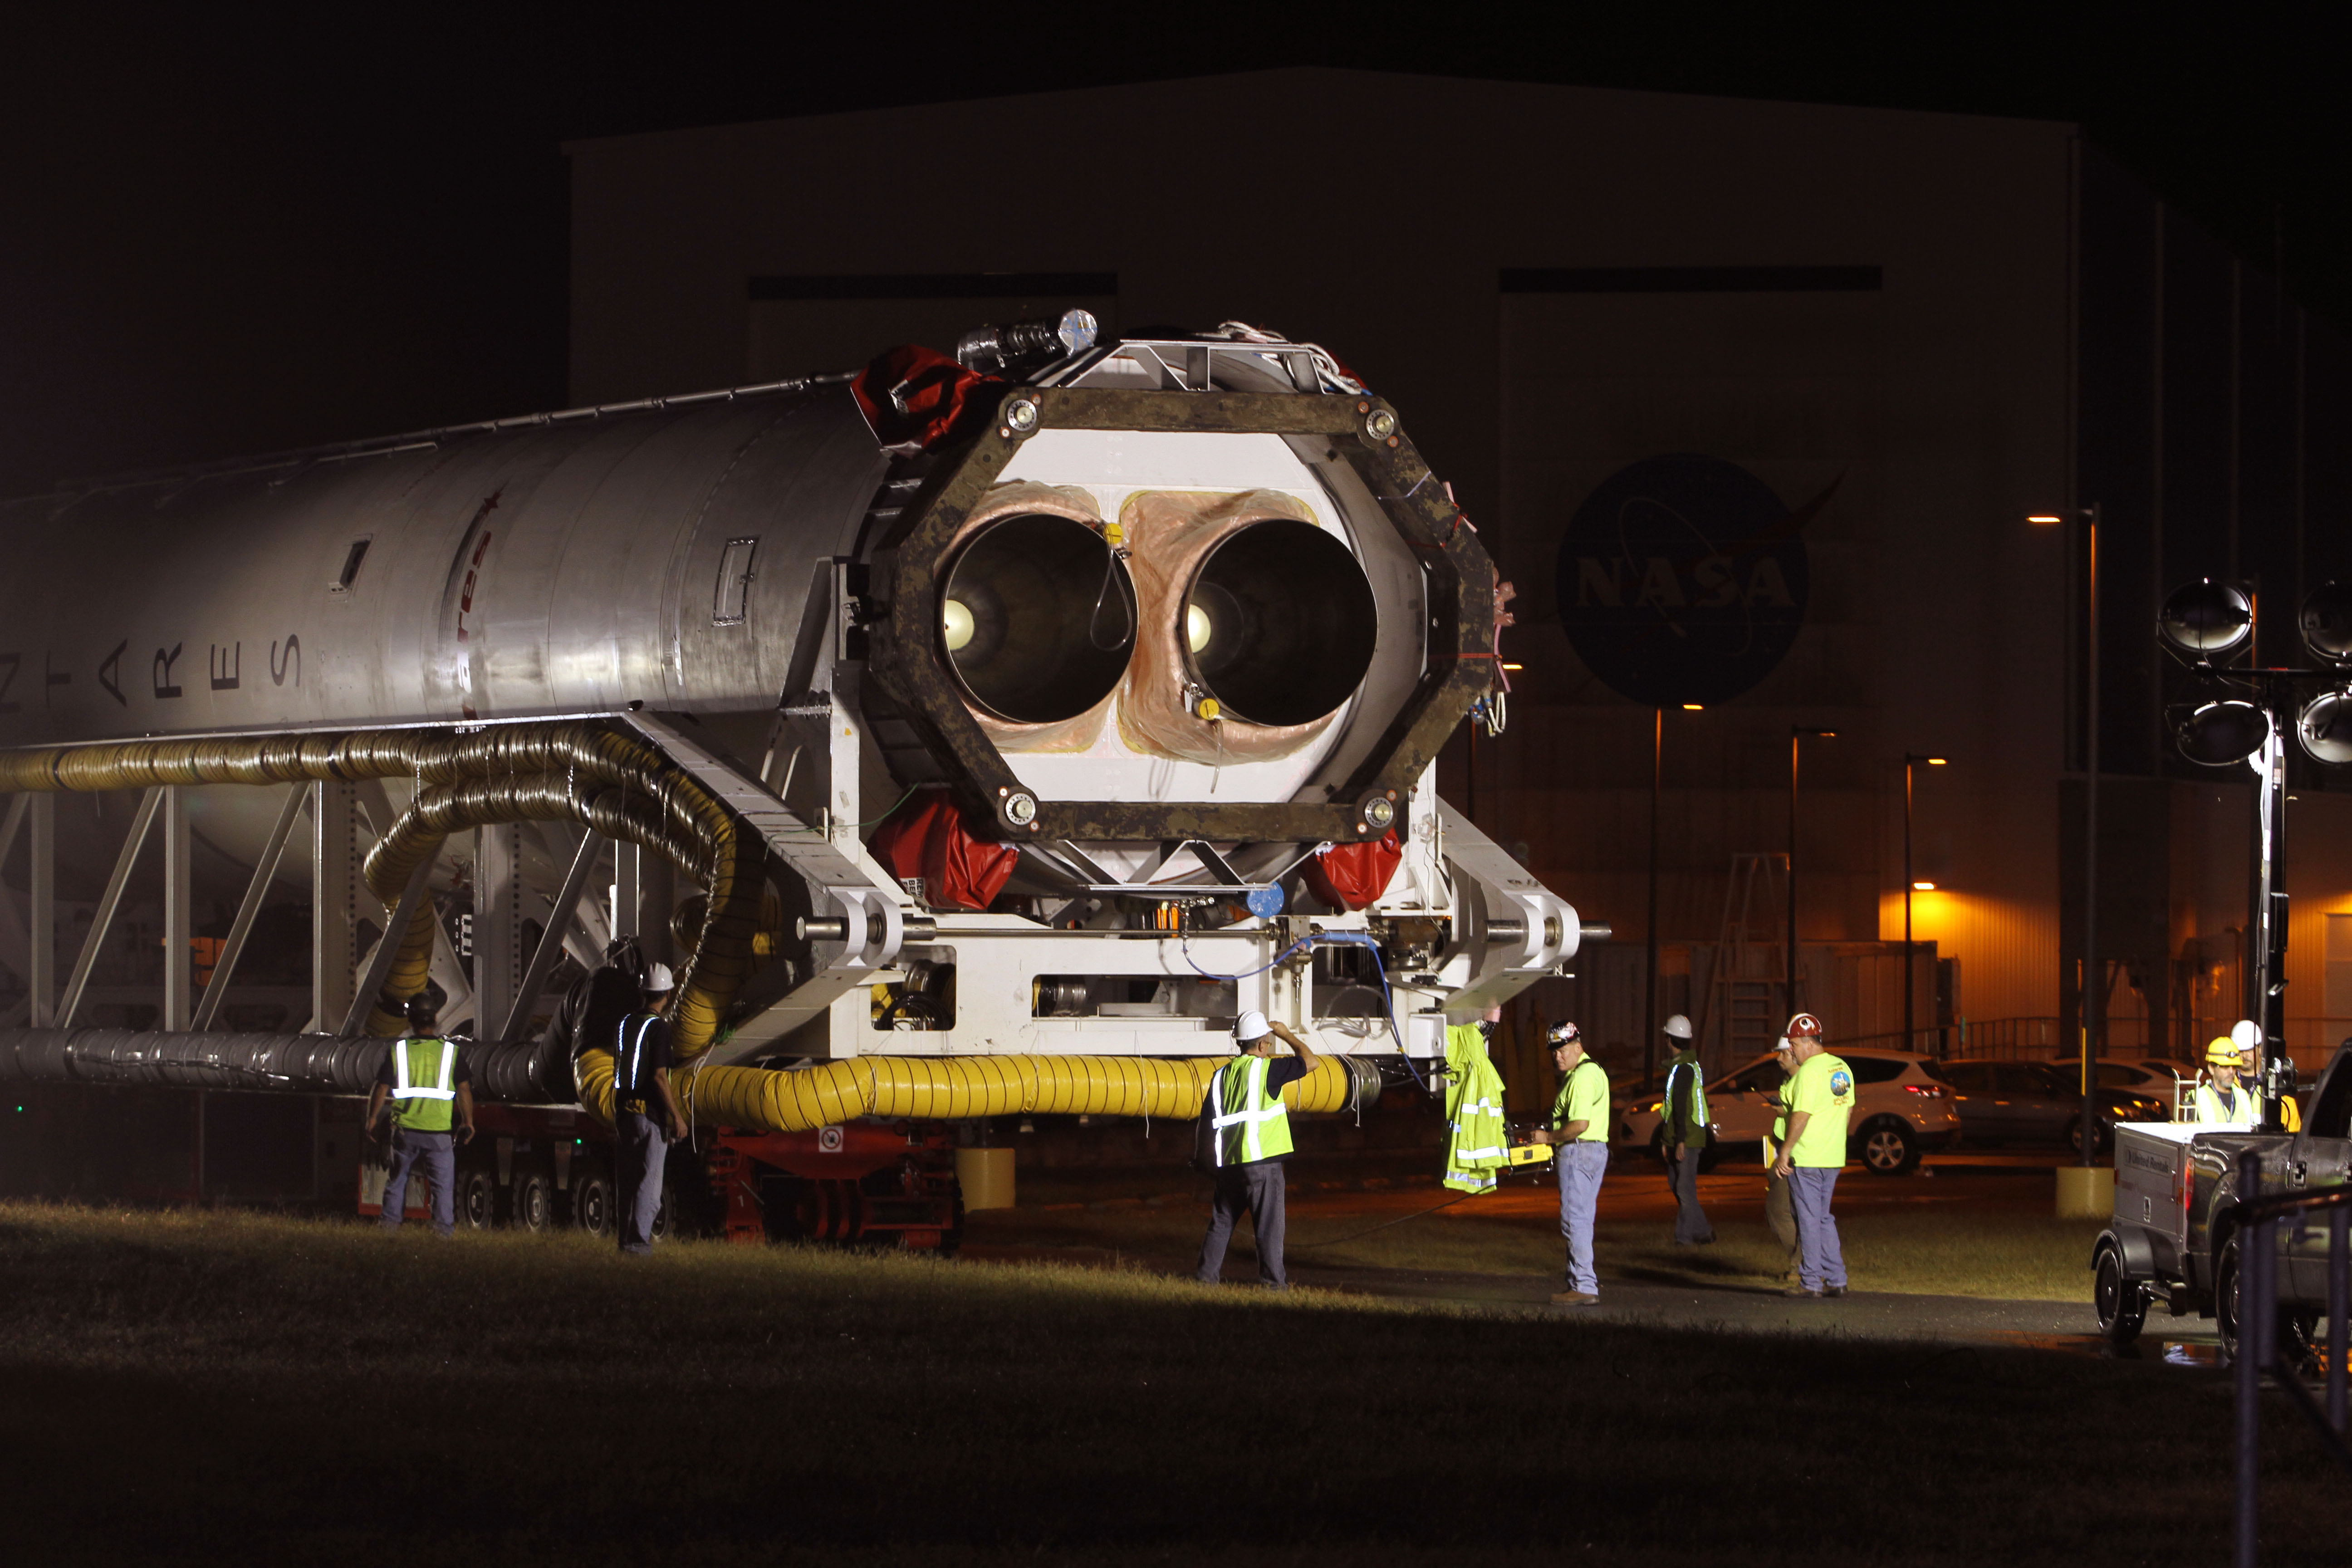 Powered by two Aerojet AJ-26 engines in its first stage, Antares will have the capacity to deliver up to 15,000 pounds to low-Earth orbit. Photo Credit: Orbital Sciences/NASA